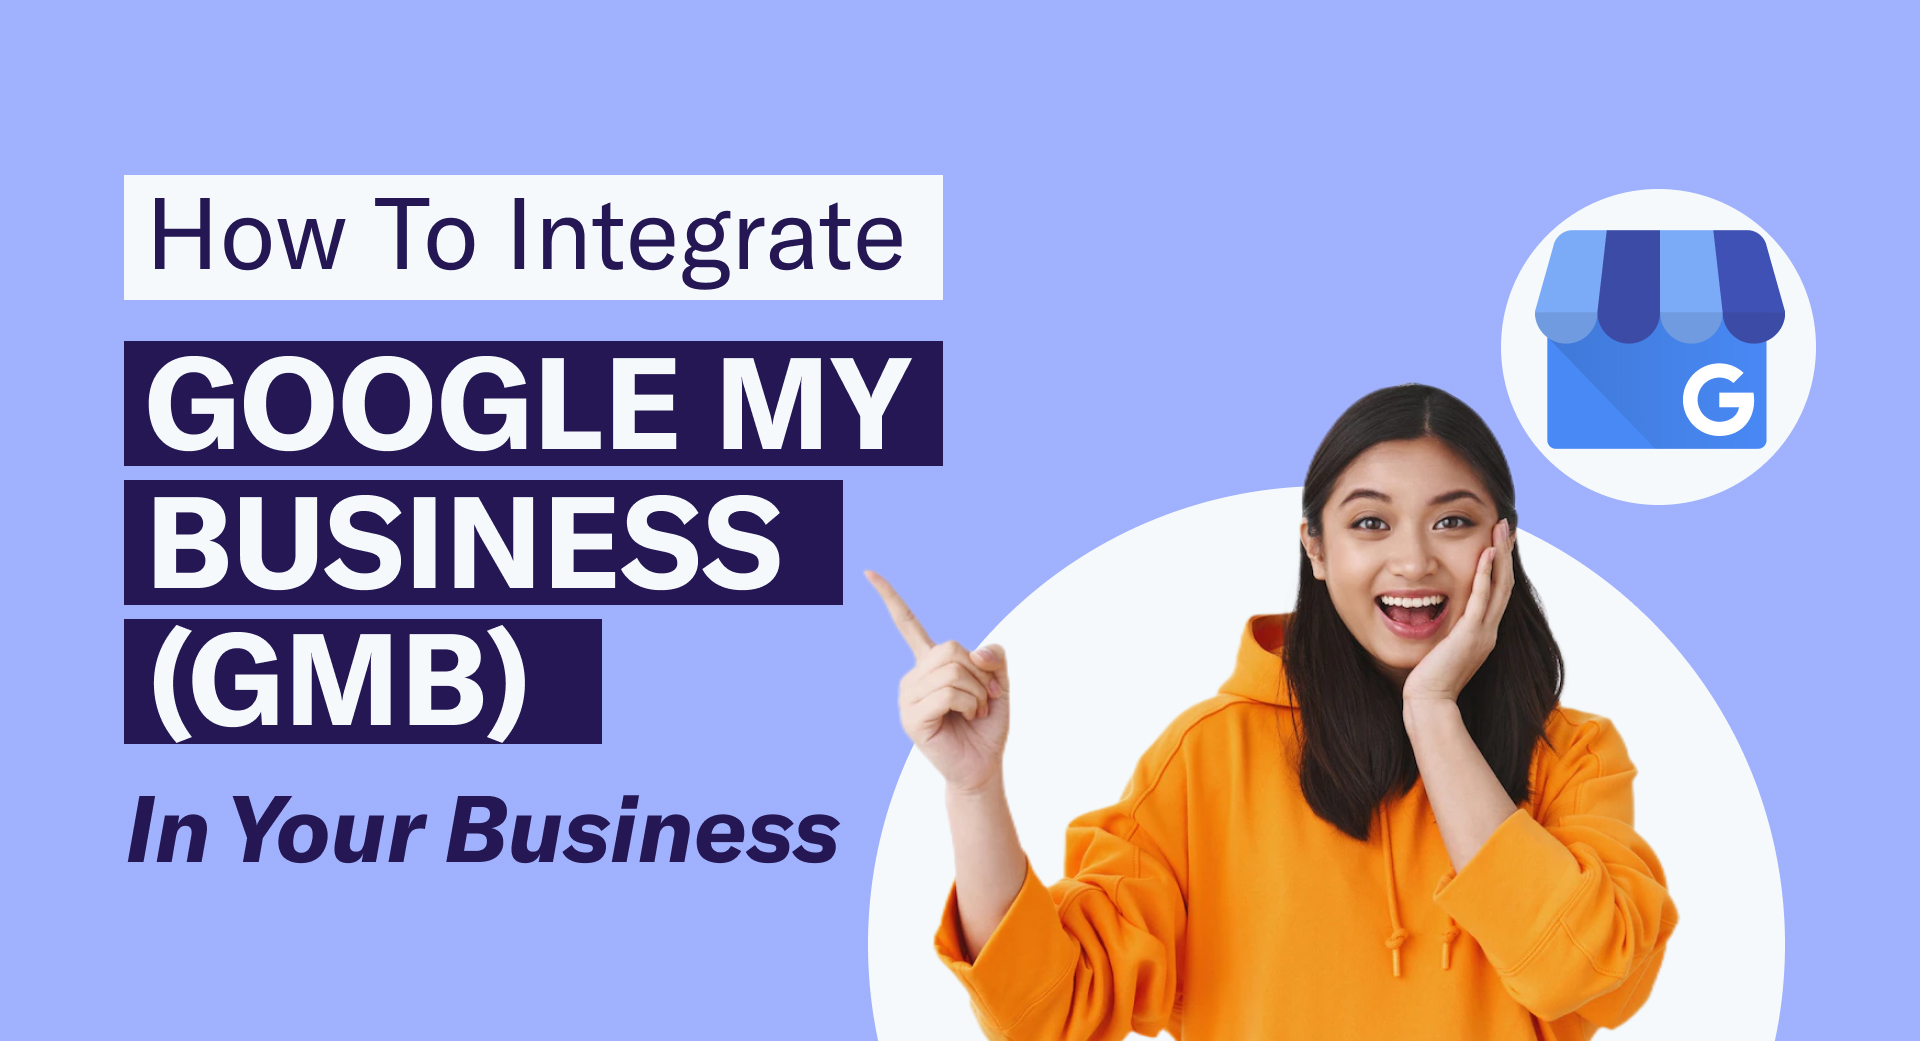 Google-My-Business-GMB-In-Your-Business